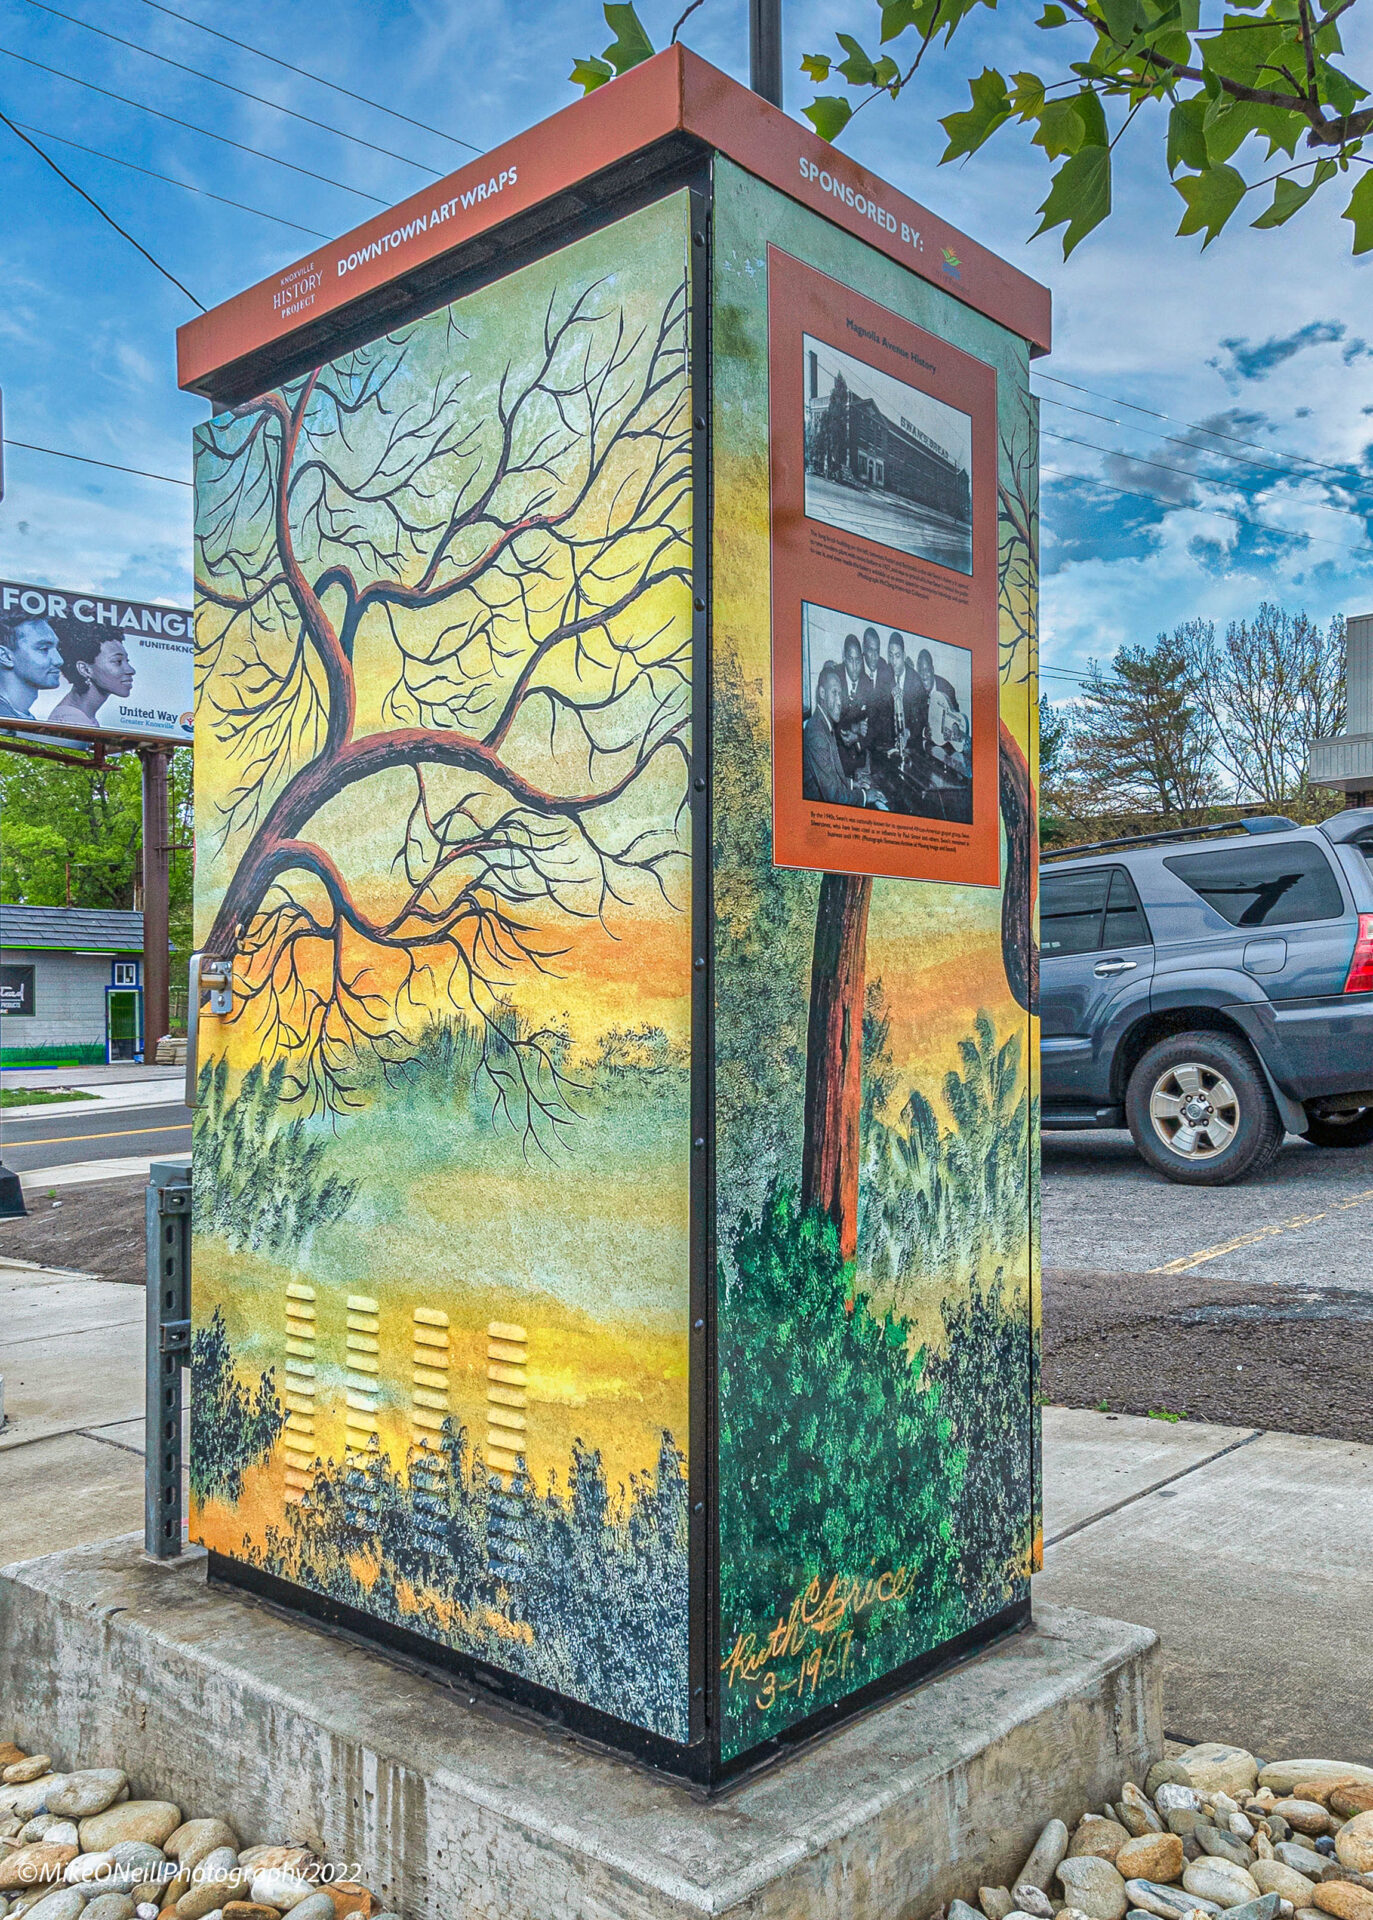 Untitled by Ruth Cobb Brice at Magnolia Avenue and N. Bertrand Street. Funded by City of Knoxville. Photography by Mike O'Neill.